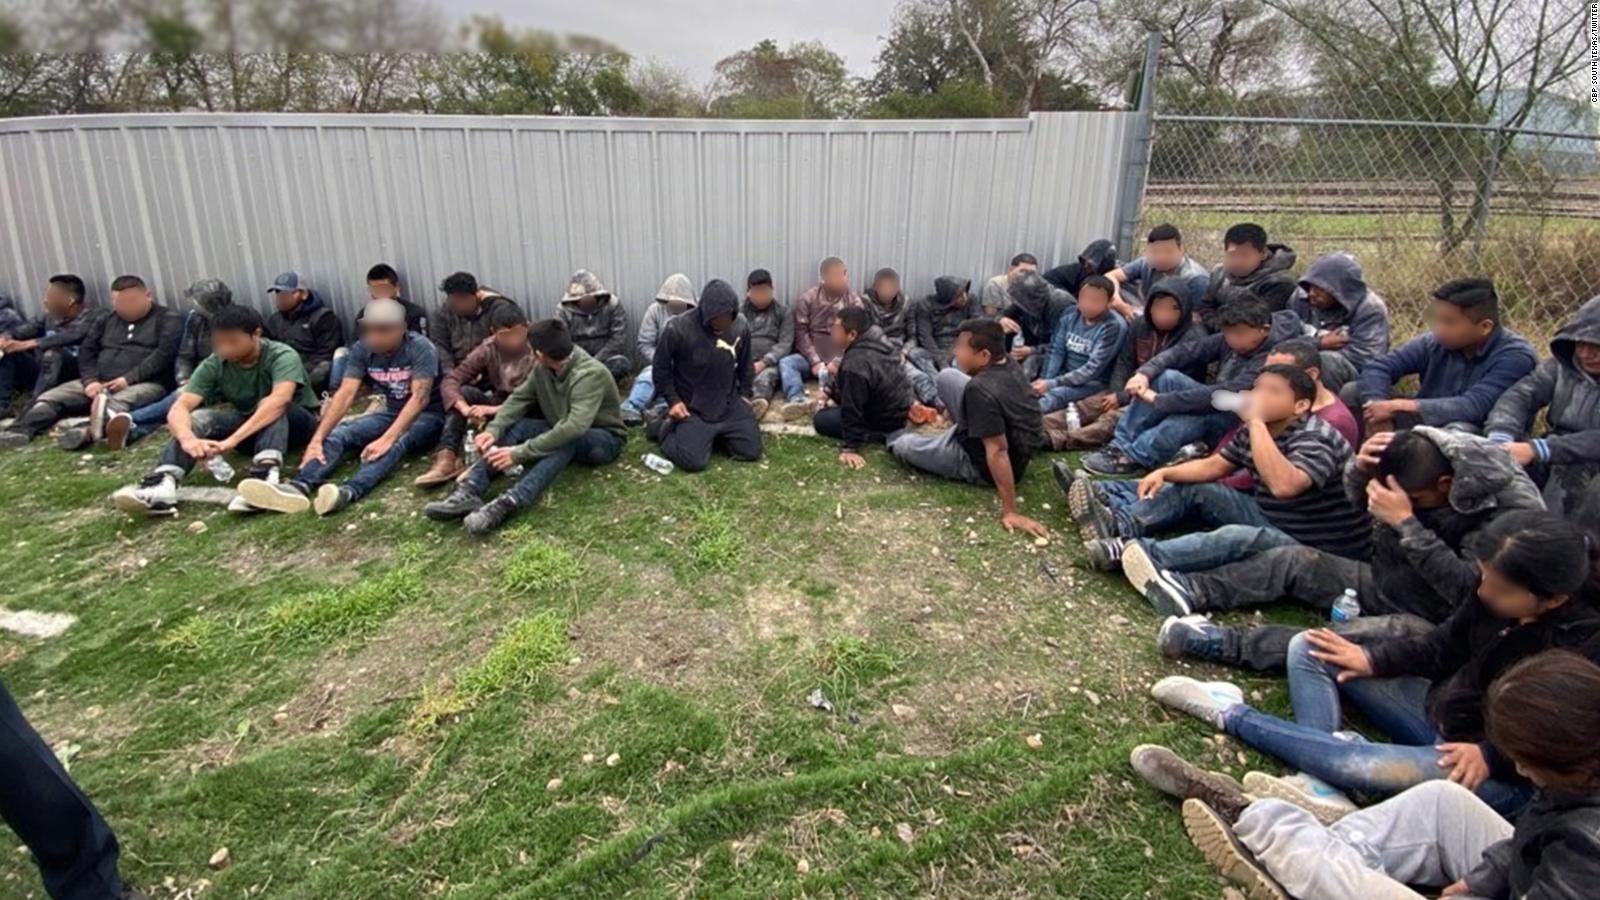 36 Migrants Were Found In Texas Under A Load Of Gravel In The Secret